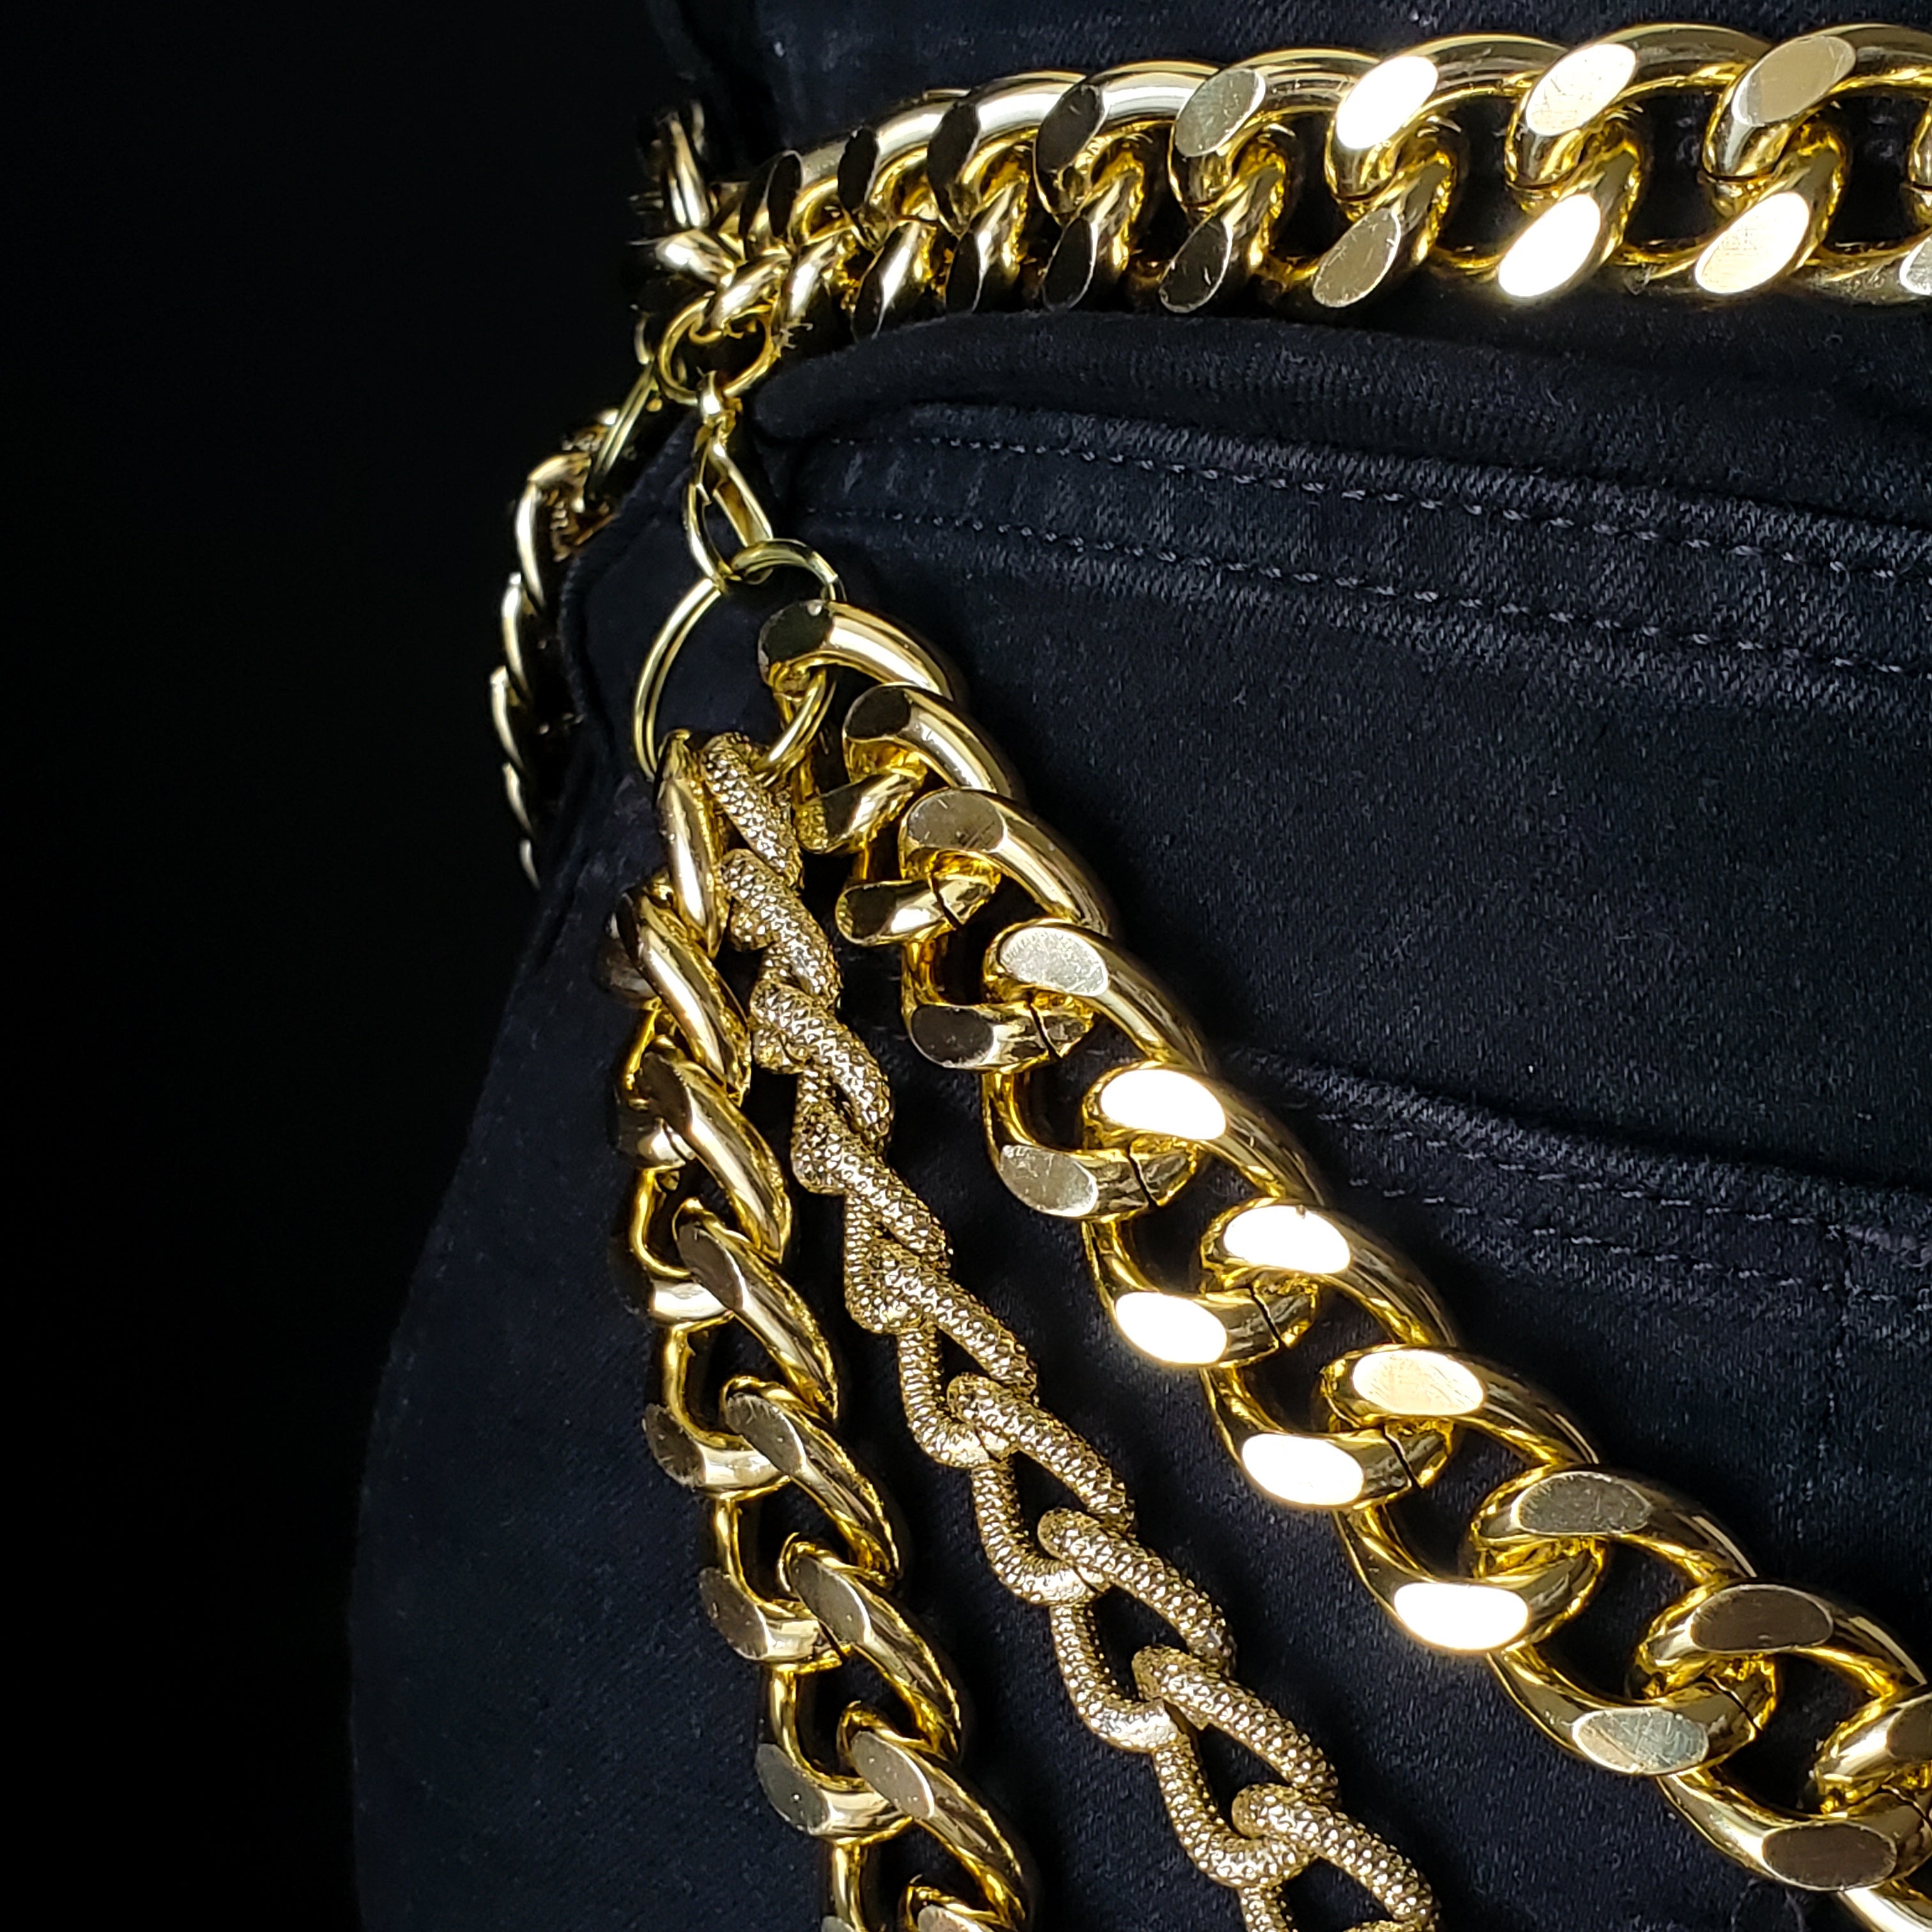 Shop FWHLR bodychains, jewelry and accessories. Our women's statement jewelry is influenced by rap style and hop hop culture.  All bodychain jewelry is made of thick gold chain making it durable, versatile and classic. The perfect chain belt for thick curvy sexy baddies. 